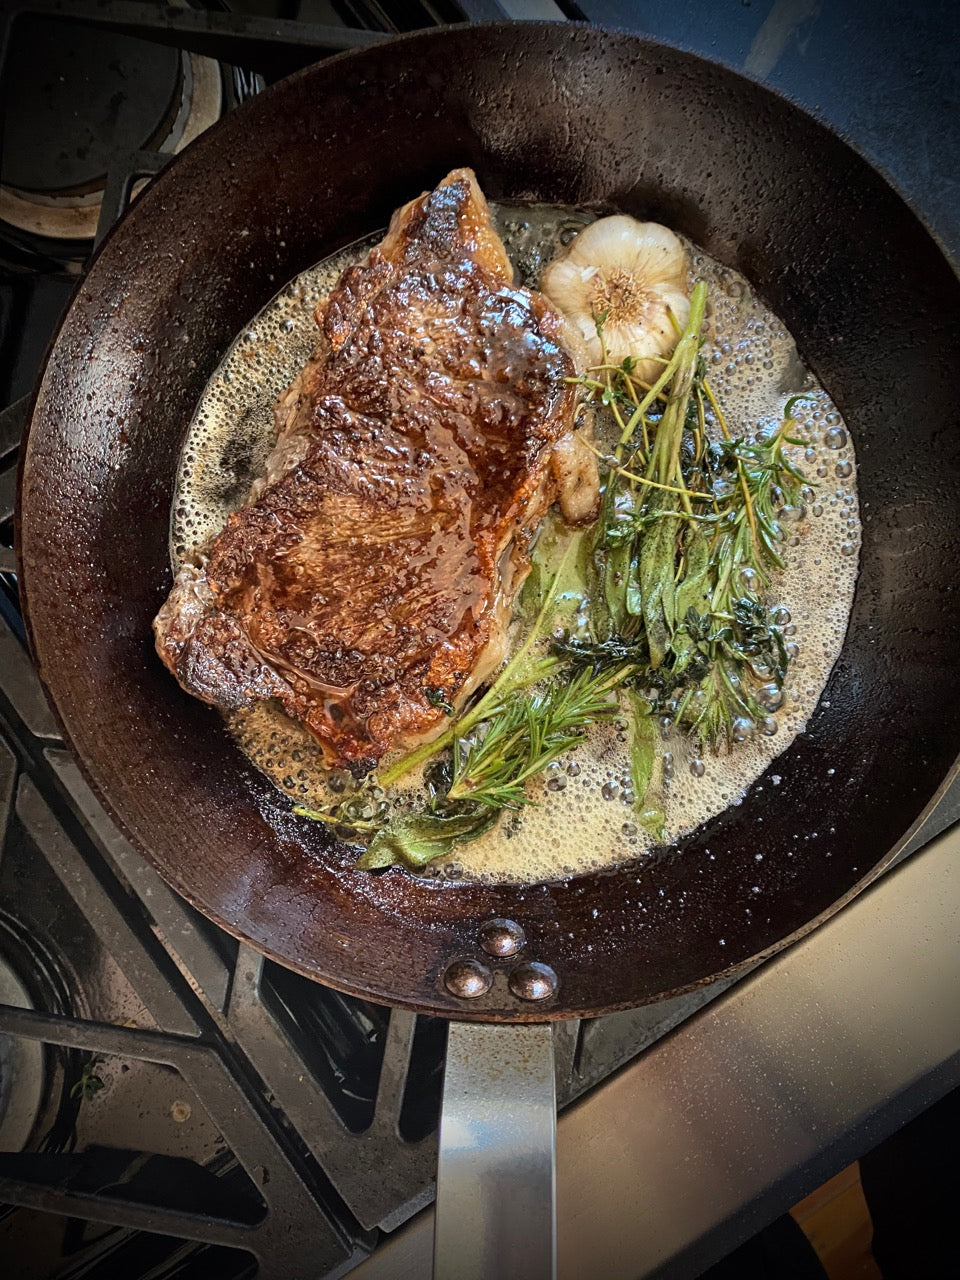 How To Cook With Your Carbon Steel Griddle